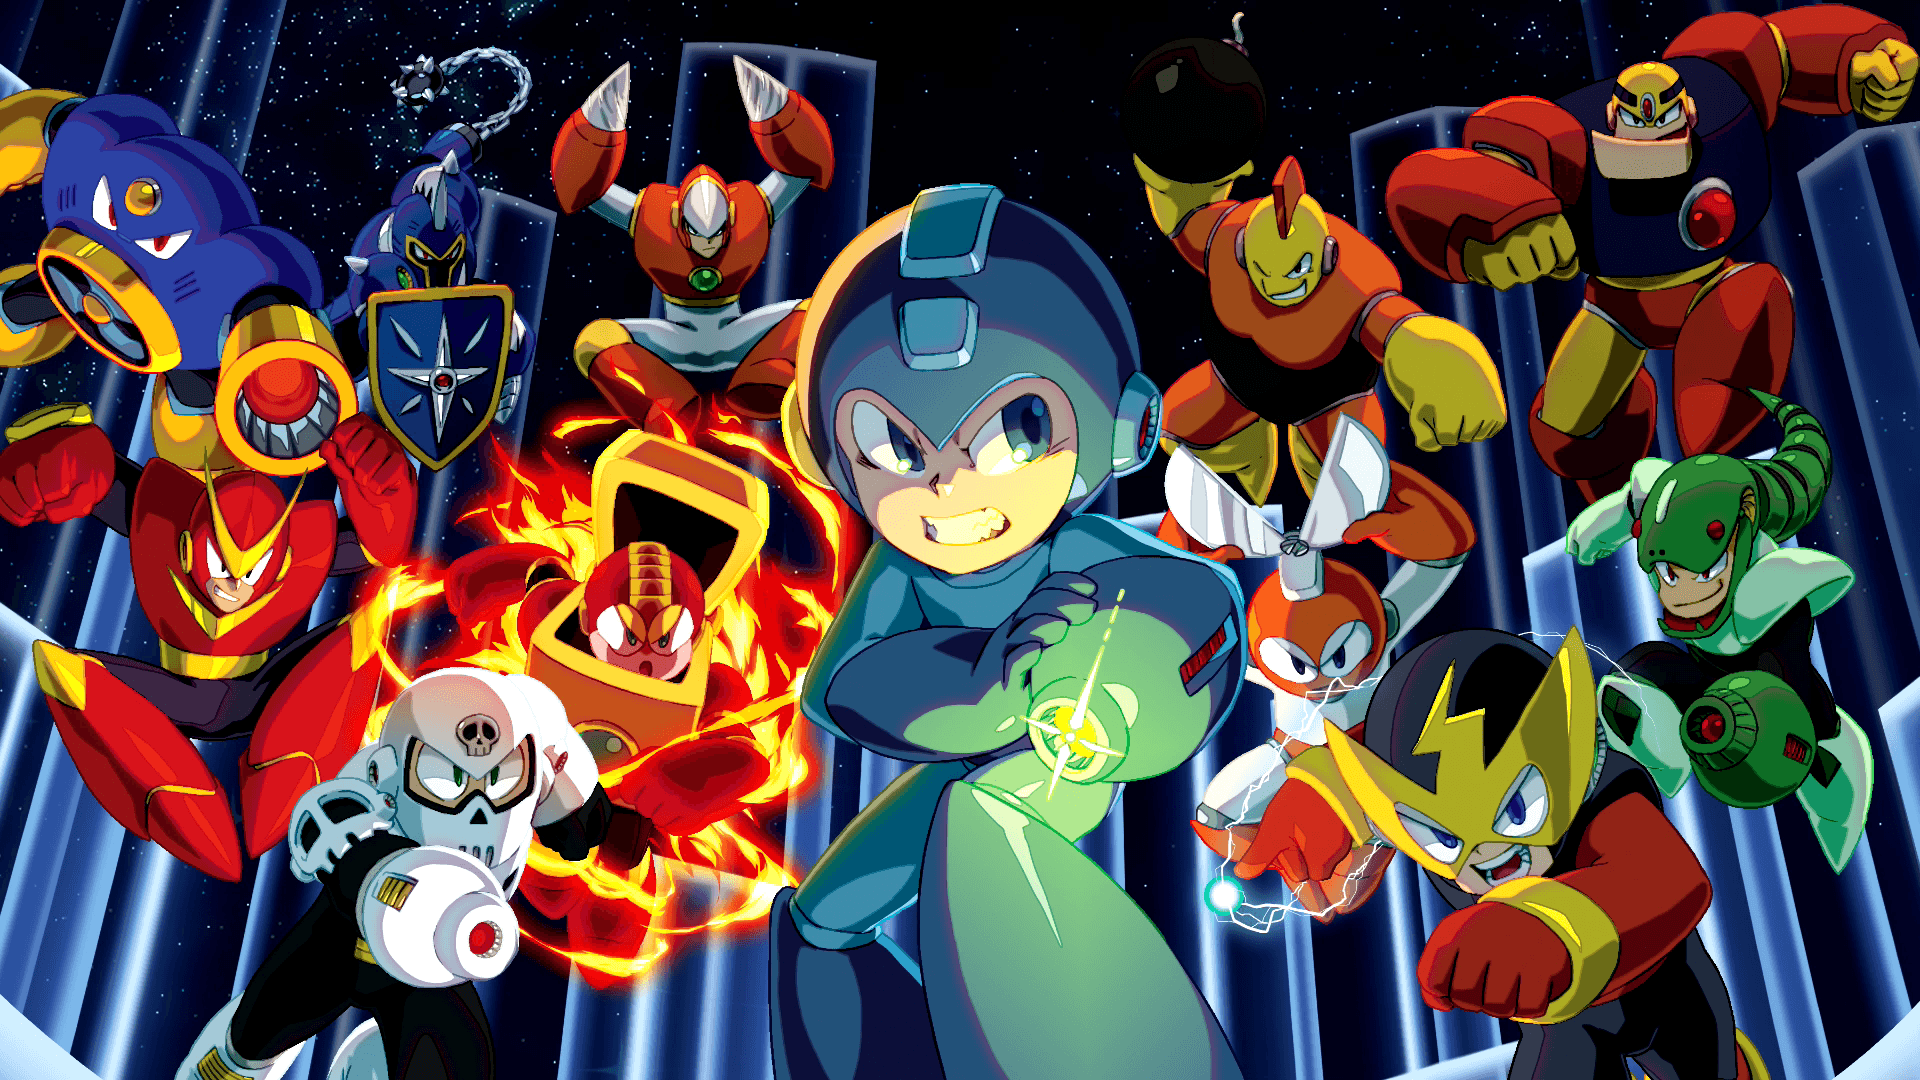 Mega Man Legacy Collection 1 and 2 Come to Nintendo Switch in 2018